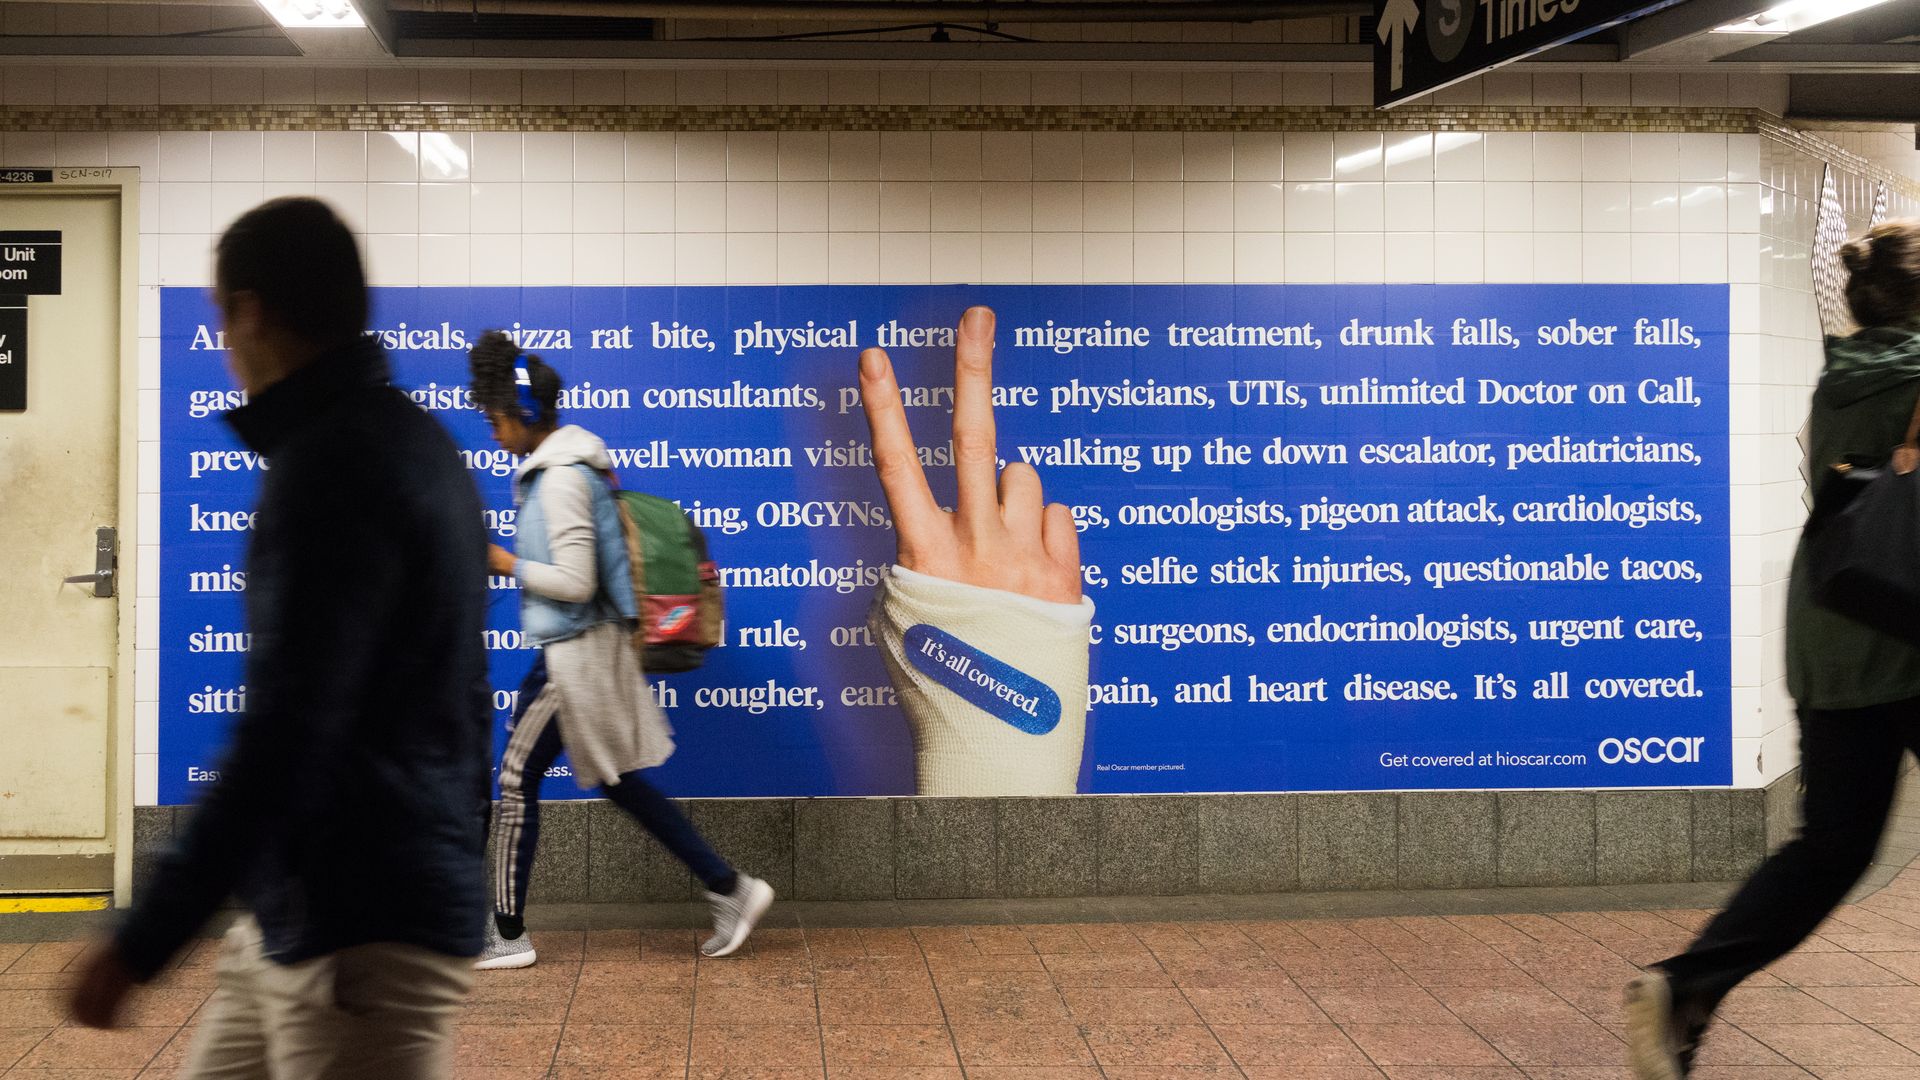 An advertisement for Oscar health insurance in a New York subway.